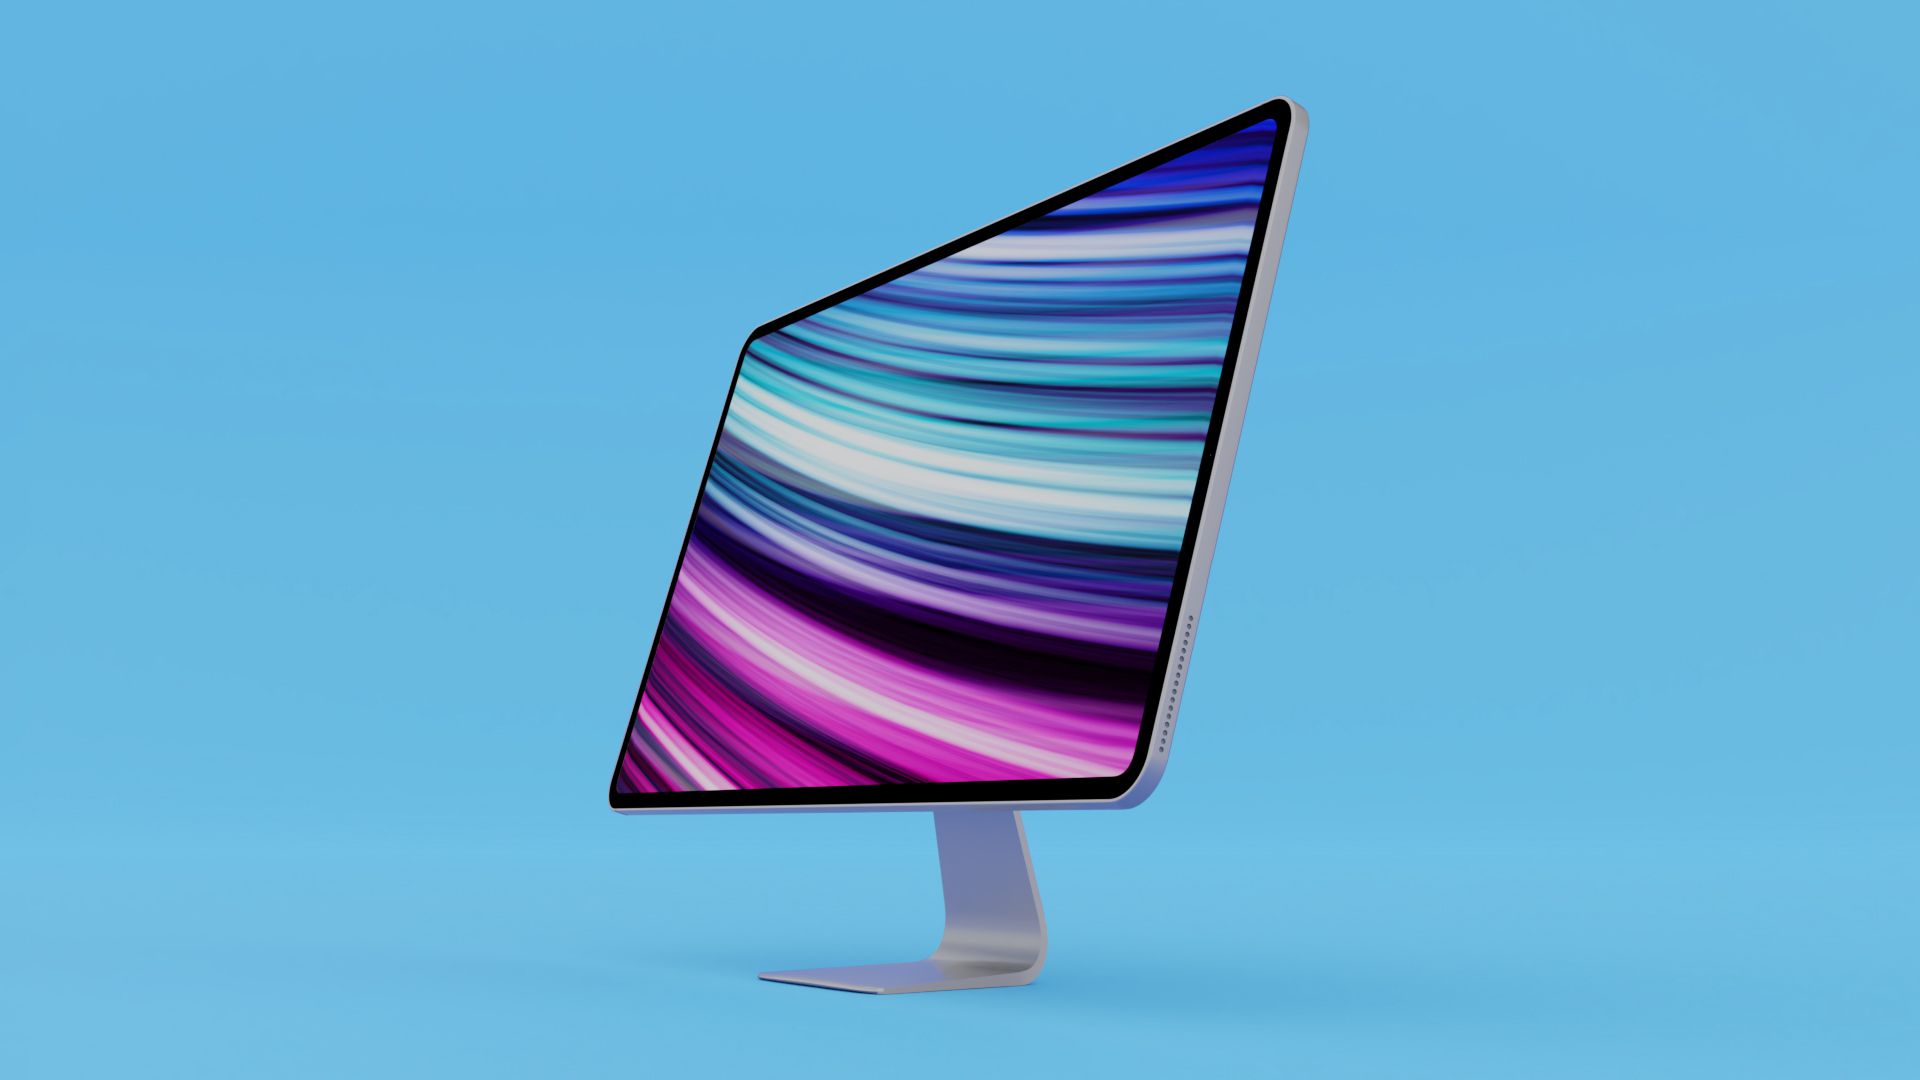 Will a redesigned iMac arrive in 2021? | MacRumors Forums